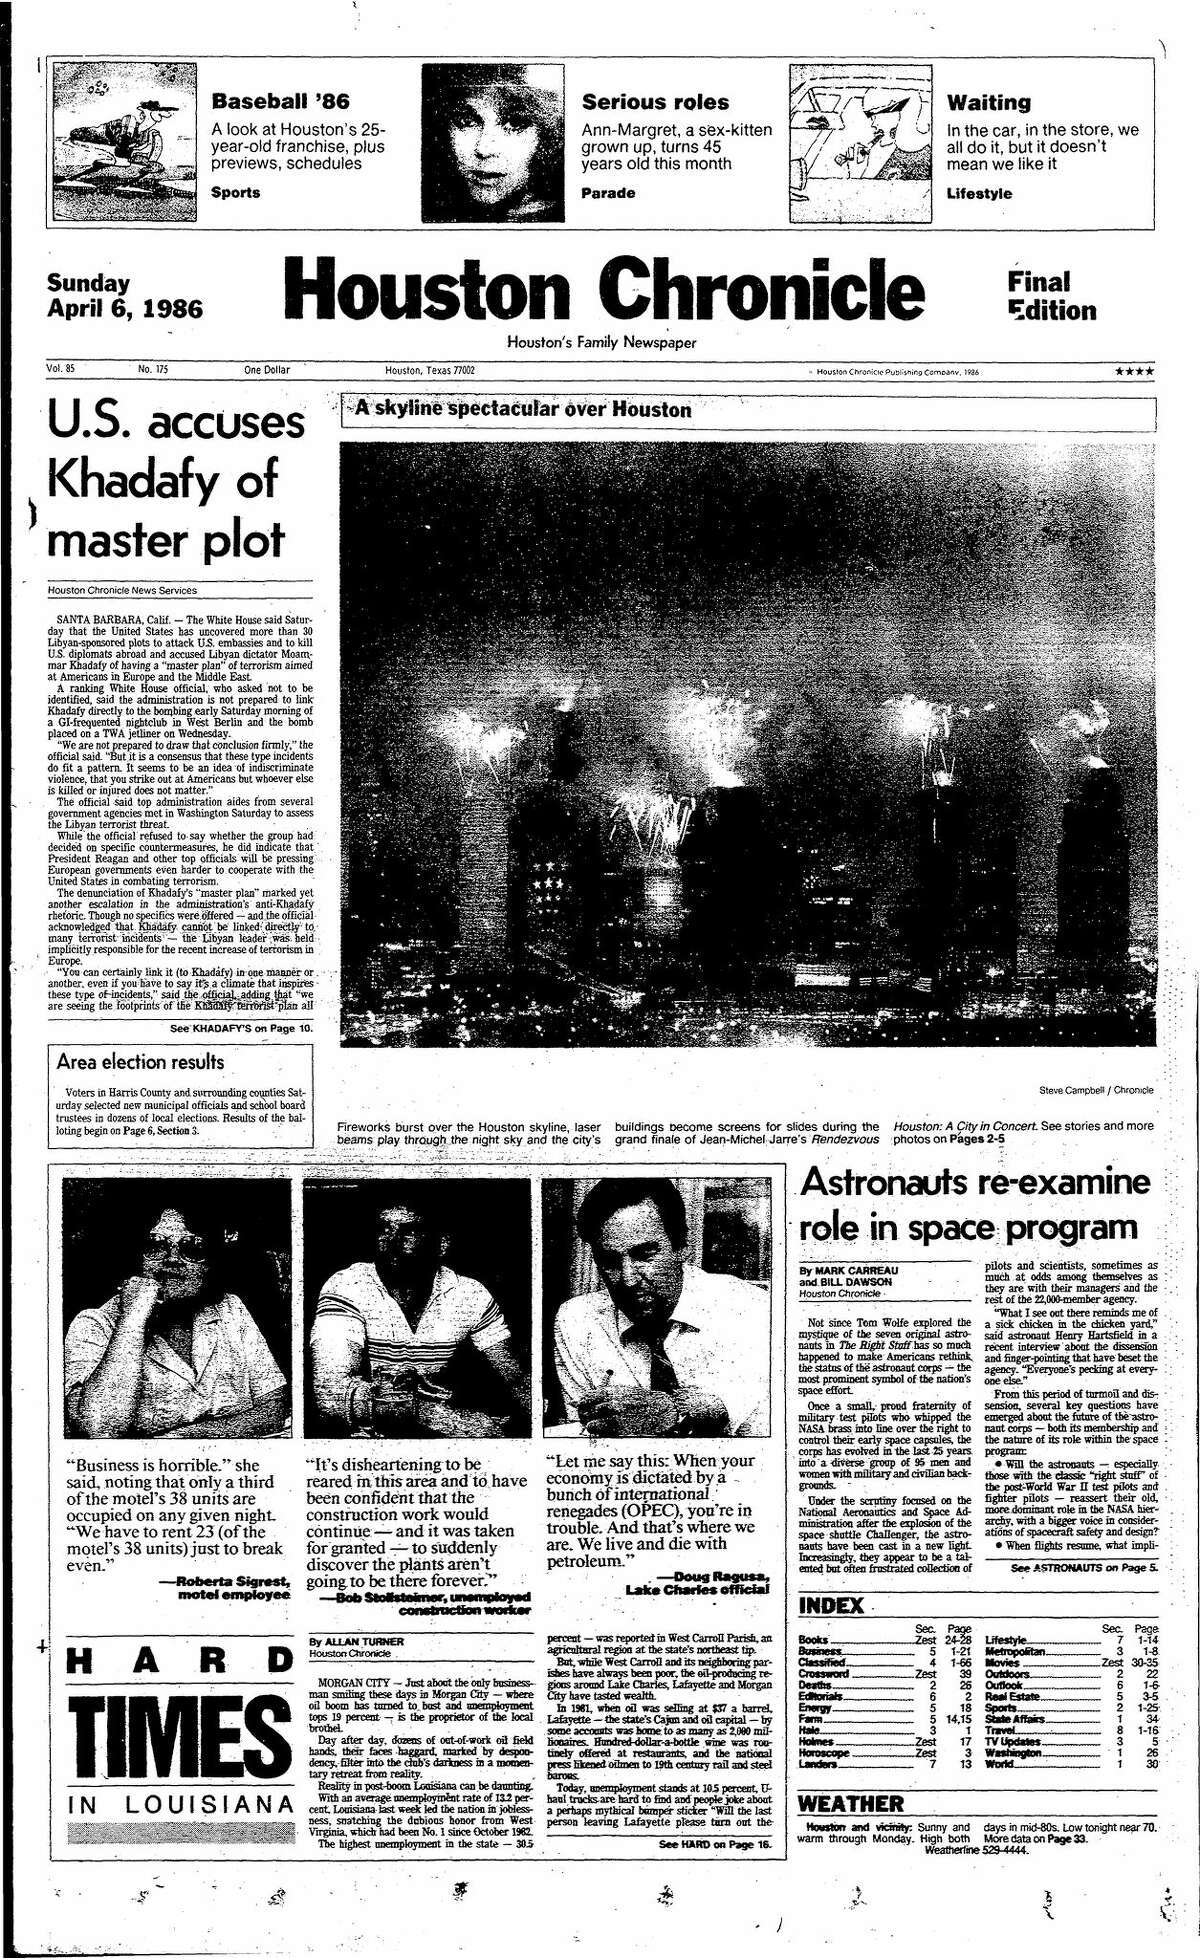 Houston Chronicle front page from April 6, 1986.